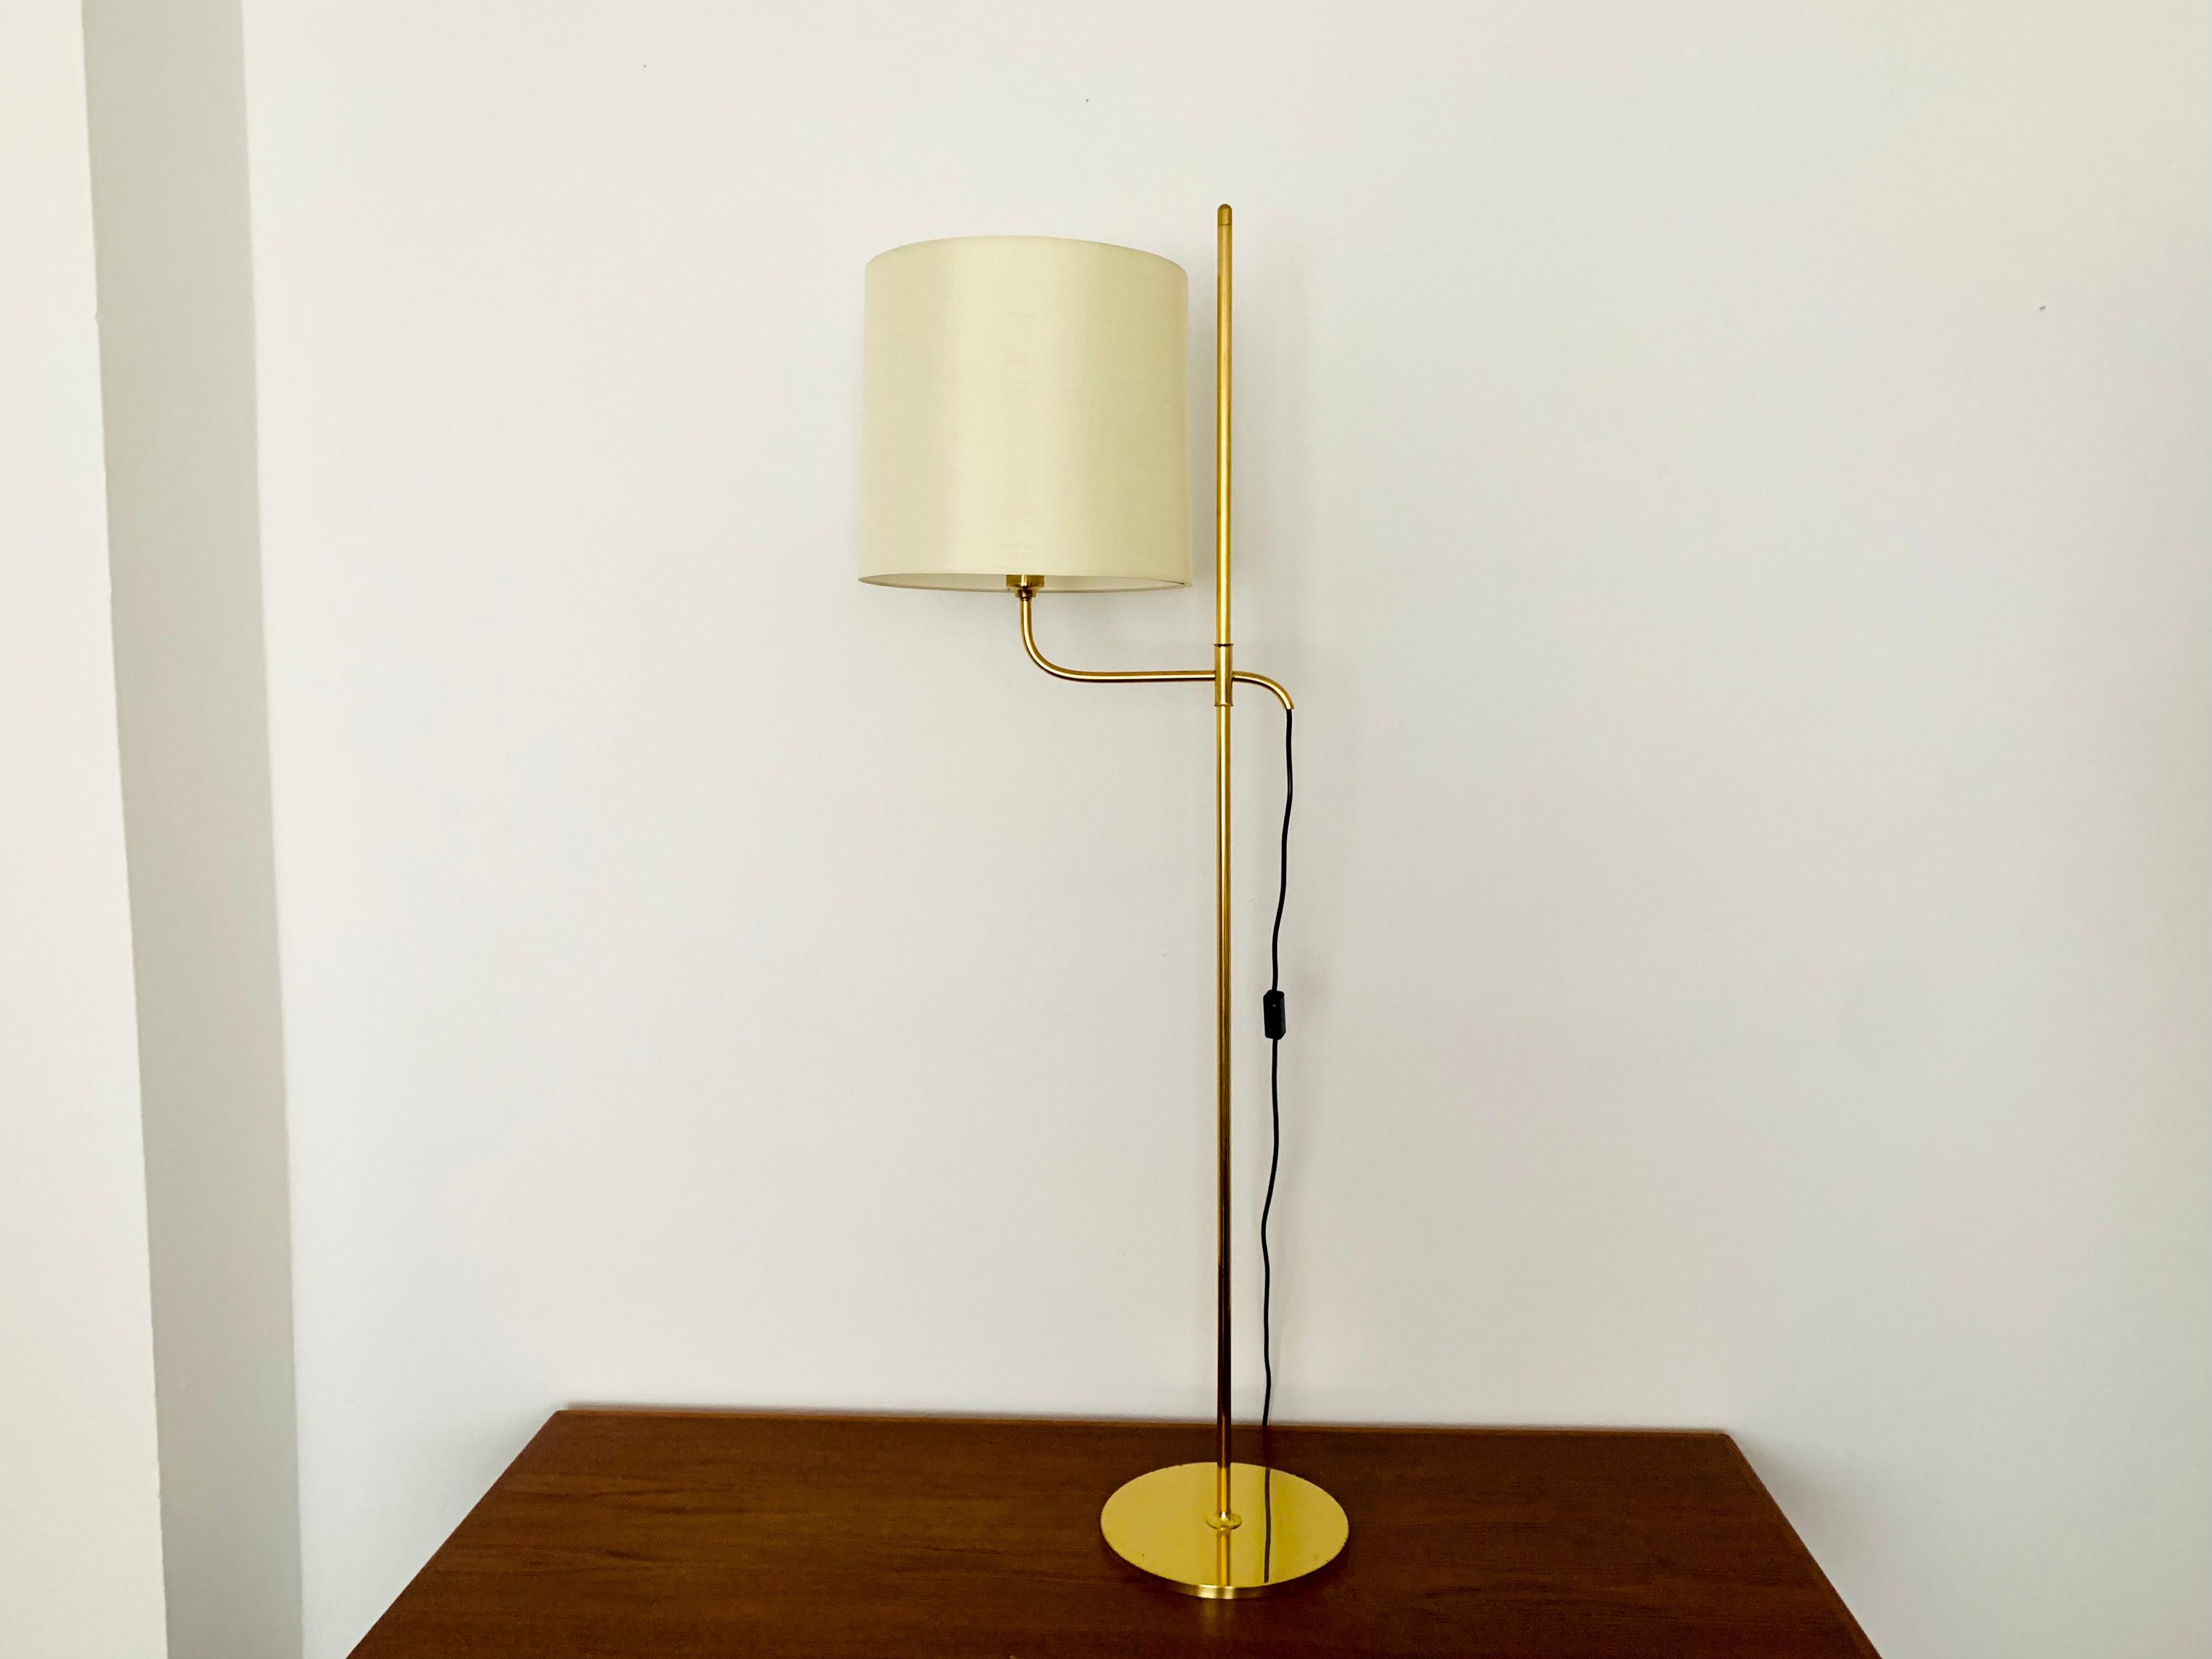 Very beautiful height-adjustable brass floor lamp from the 1970s.
The design and the very beautiful details create a very elegant and pleasant light.
The lamp creates a very cozy atmosphere and is very high quality.
Infinitely adjustable.

Design: